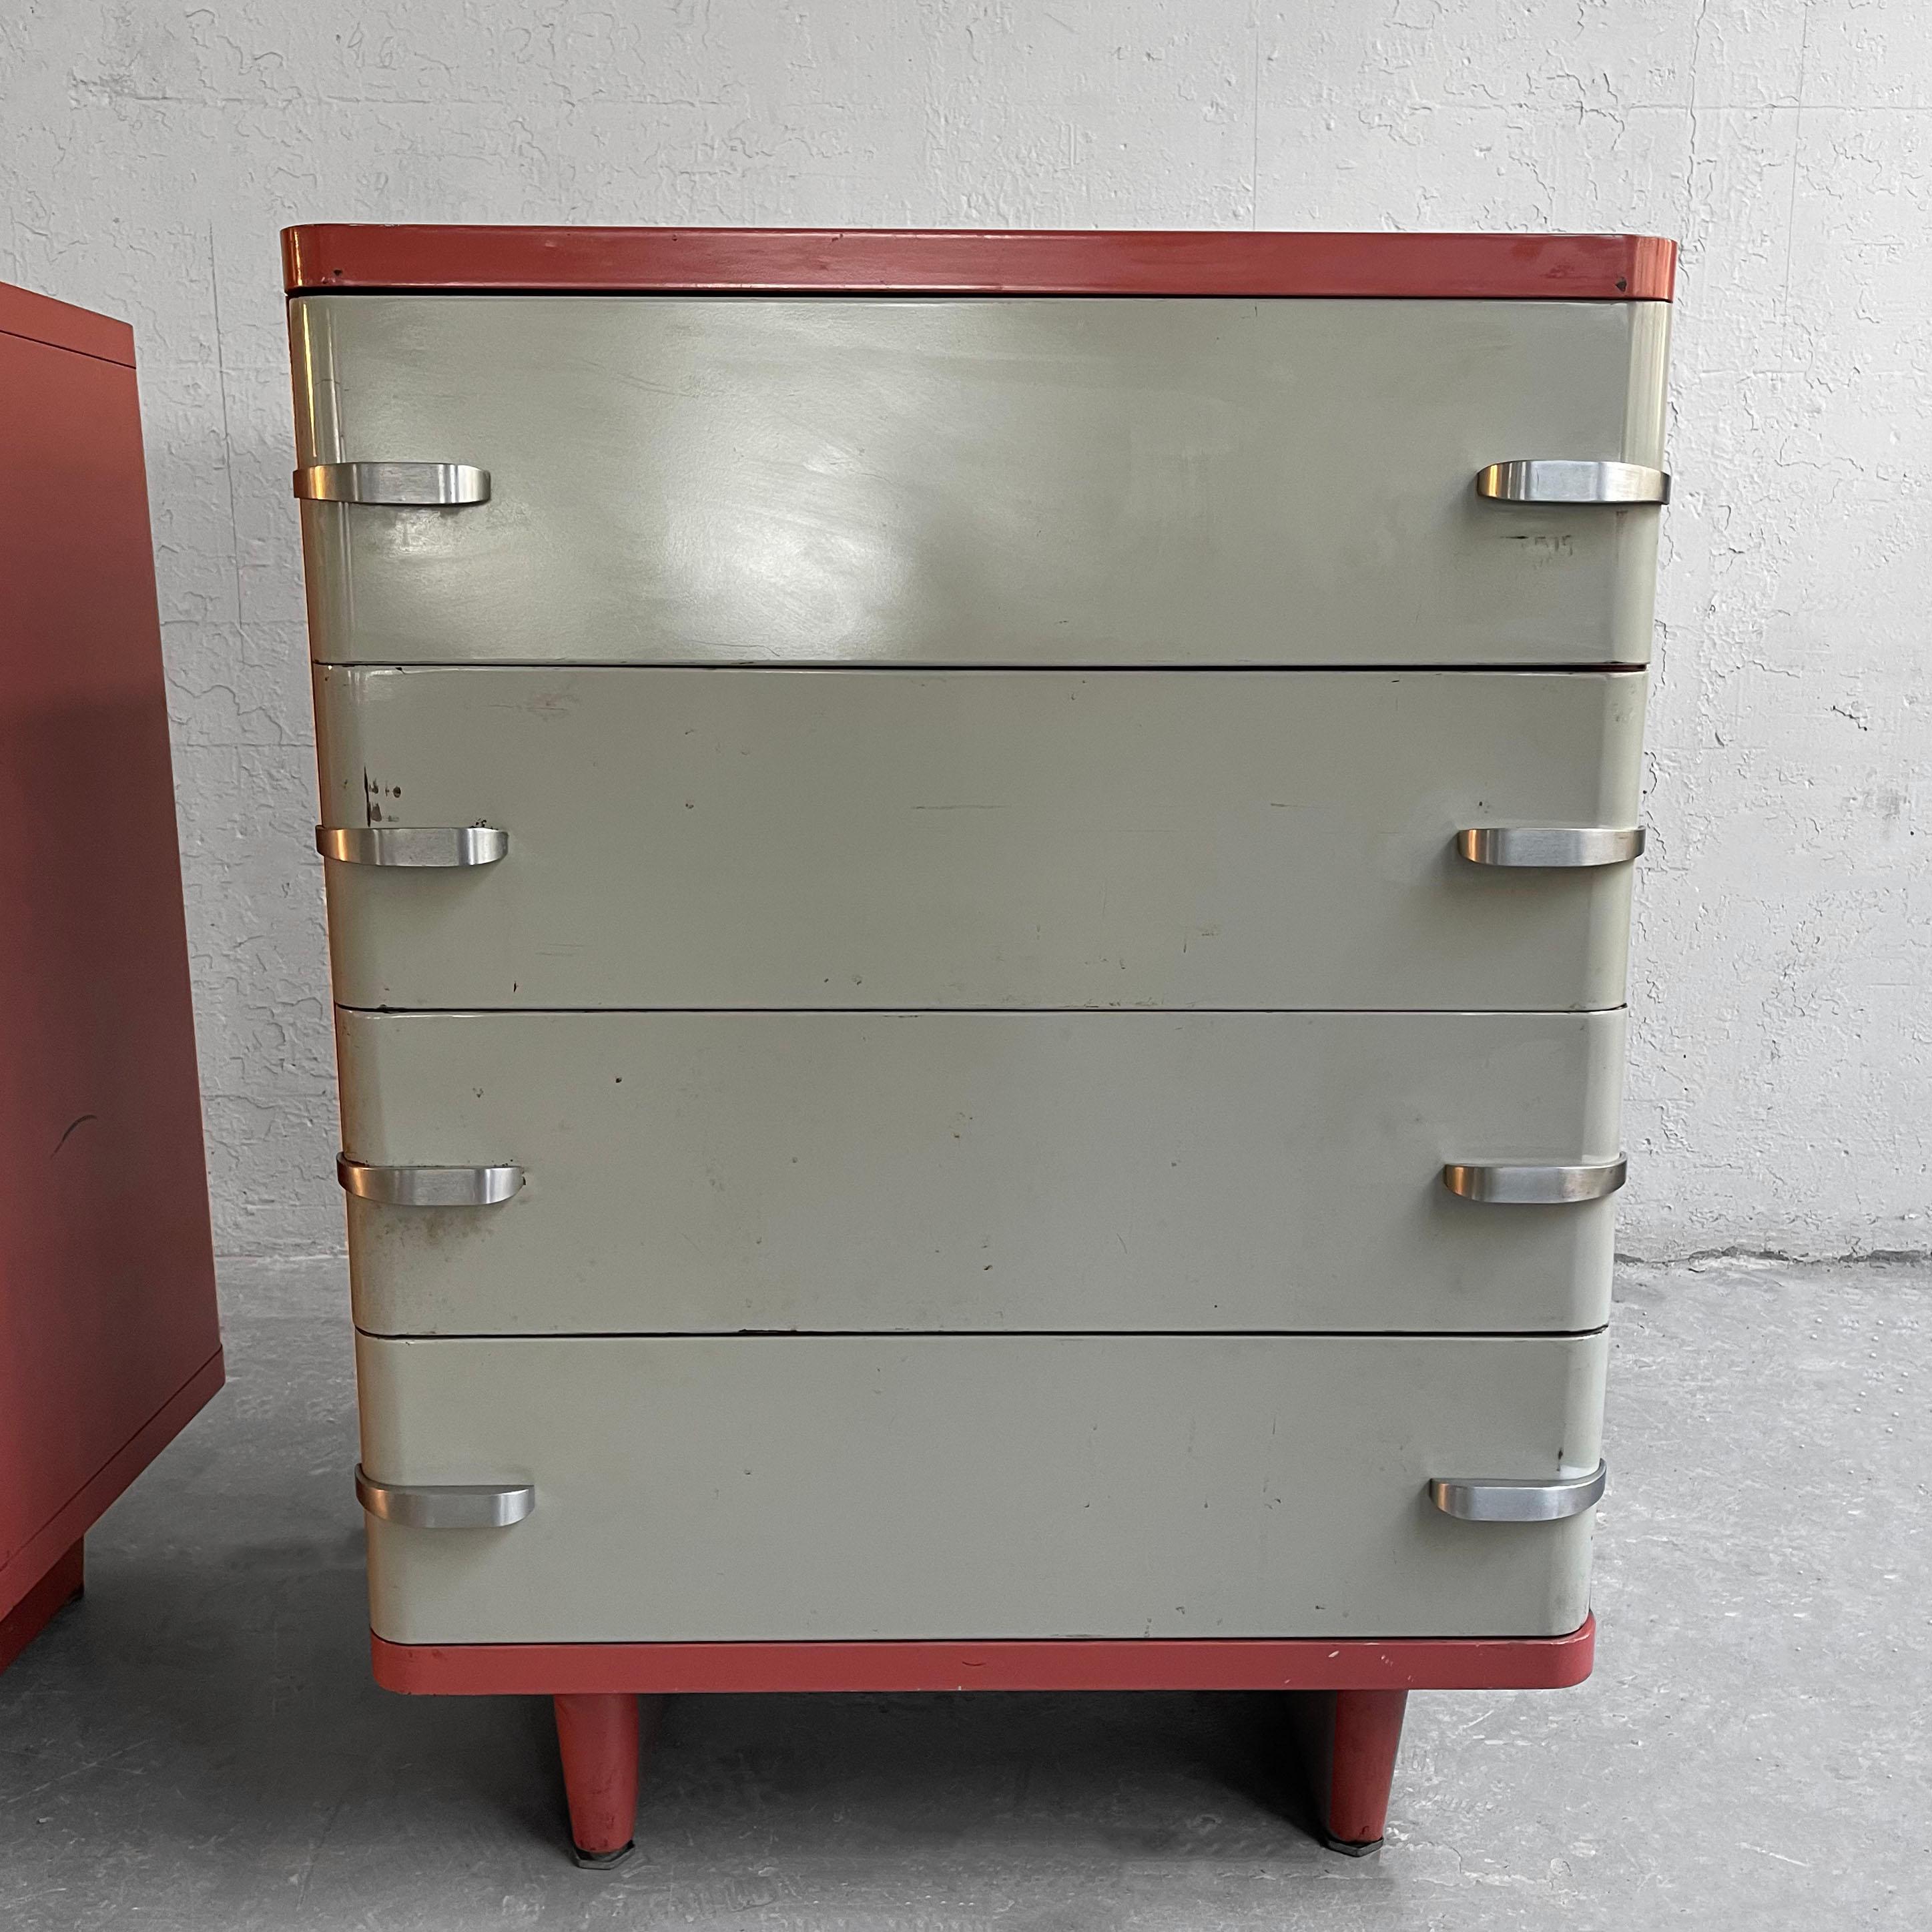 Machine-Age Painted Steel Highboy Dressers by Norman Bel Geddes For Sale 2